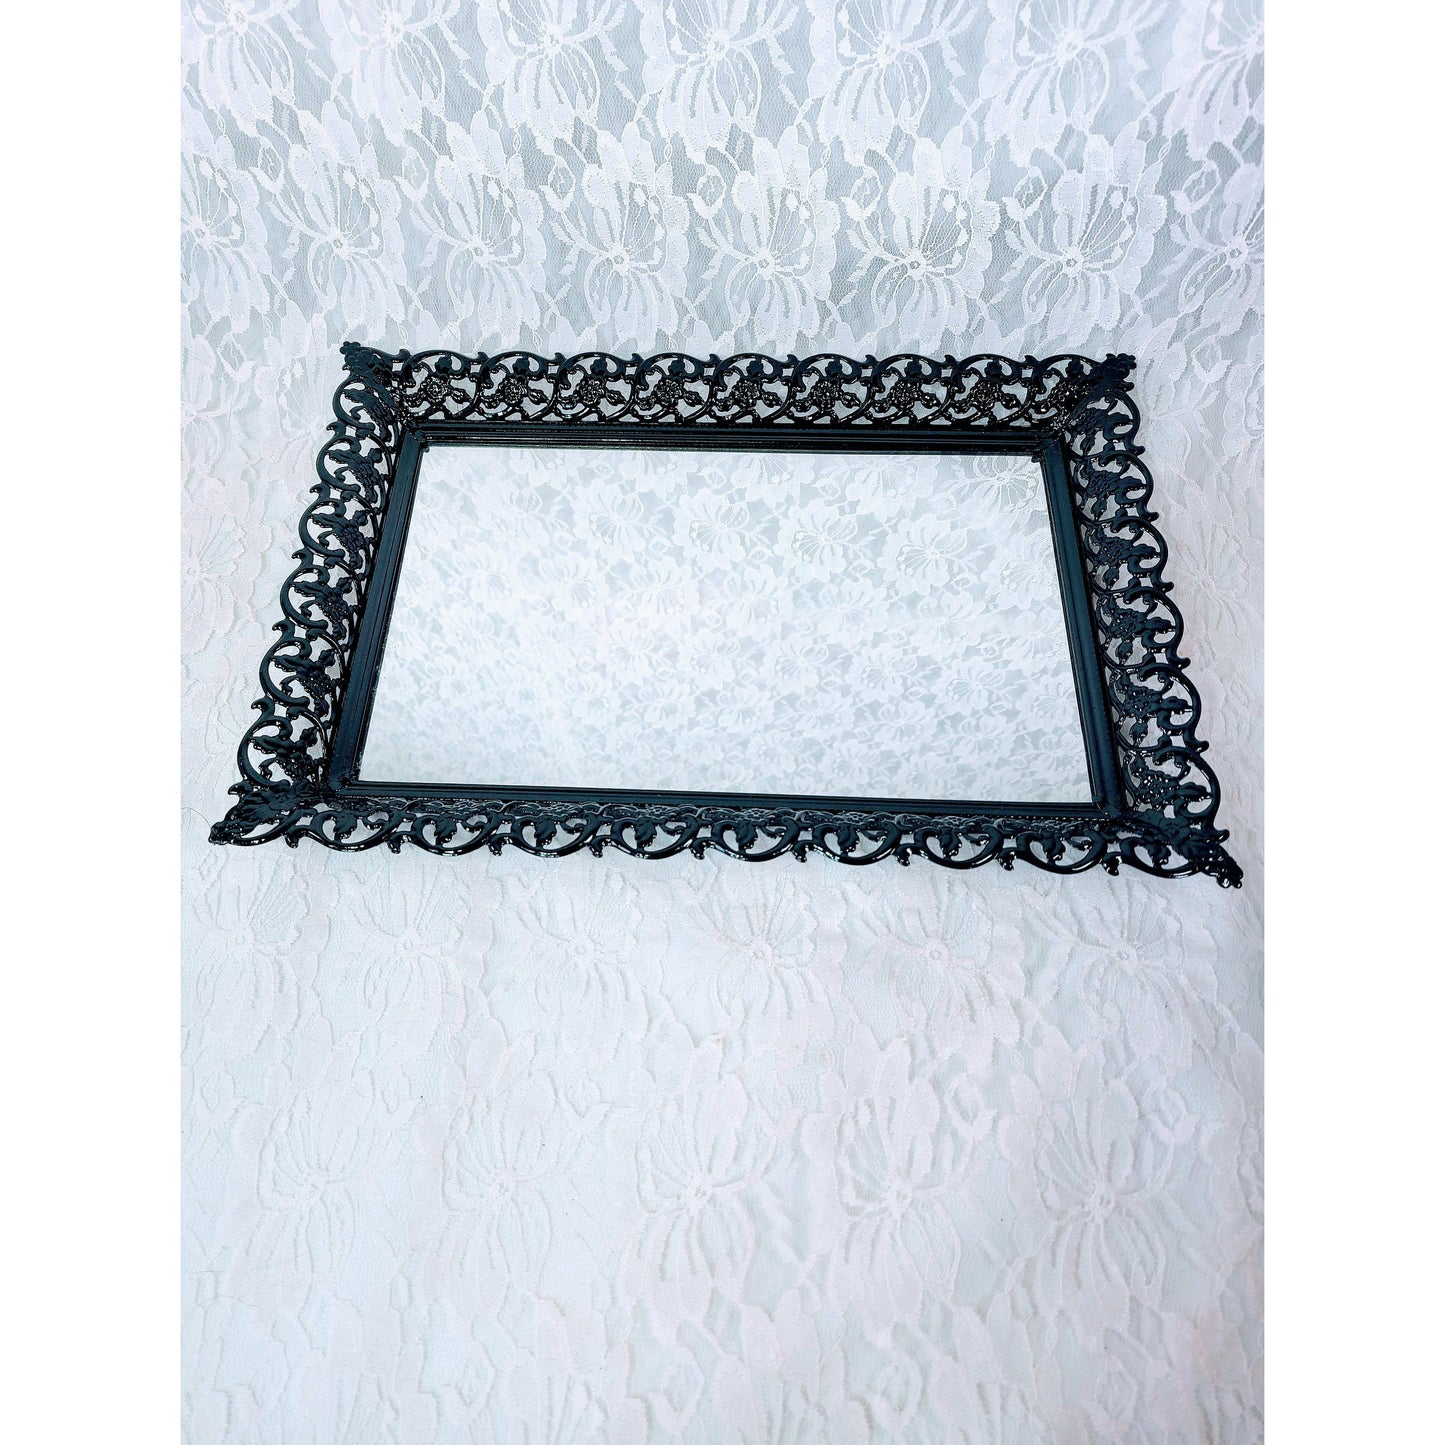 Witchy Upcycled Vintage Mirror Frame Tray ~ Vintage Vanity Décor ~ Retro Bathroom ~ Perfect to Display Crystals or Potions